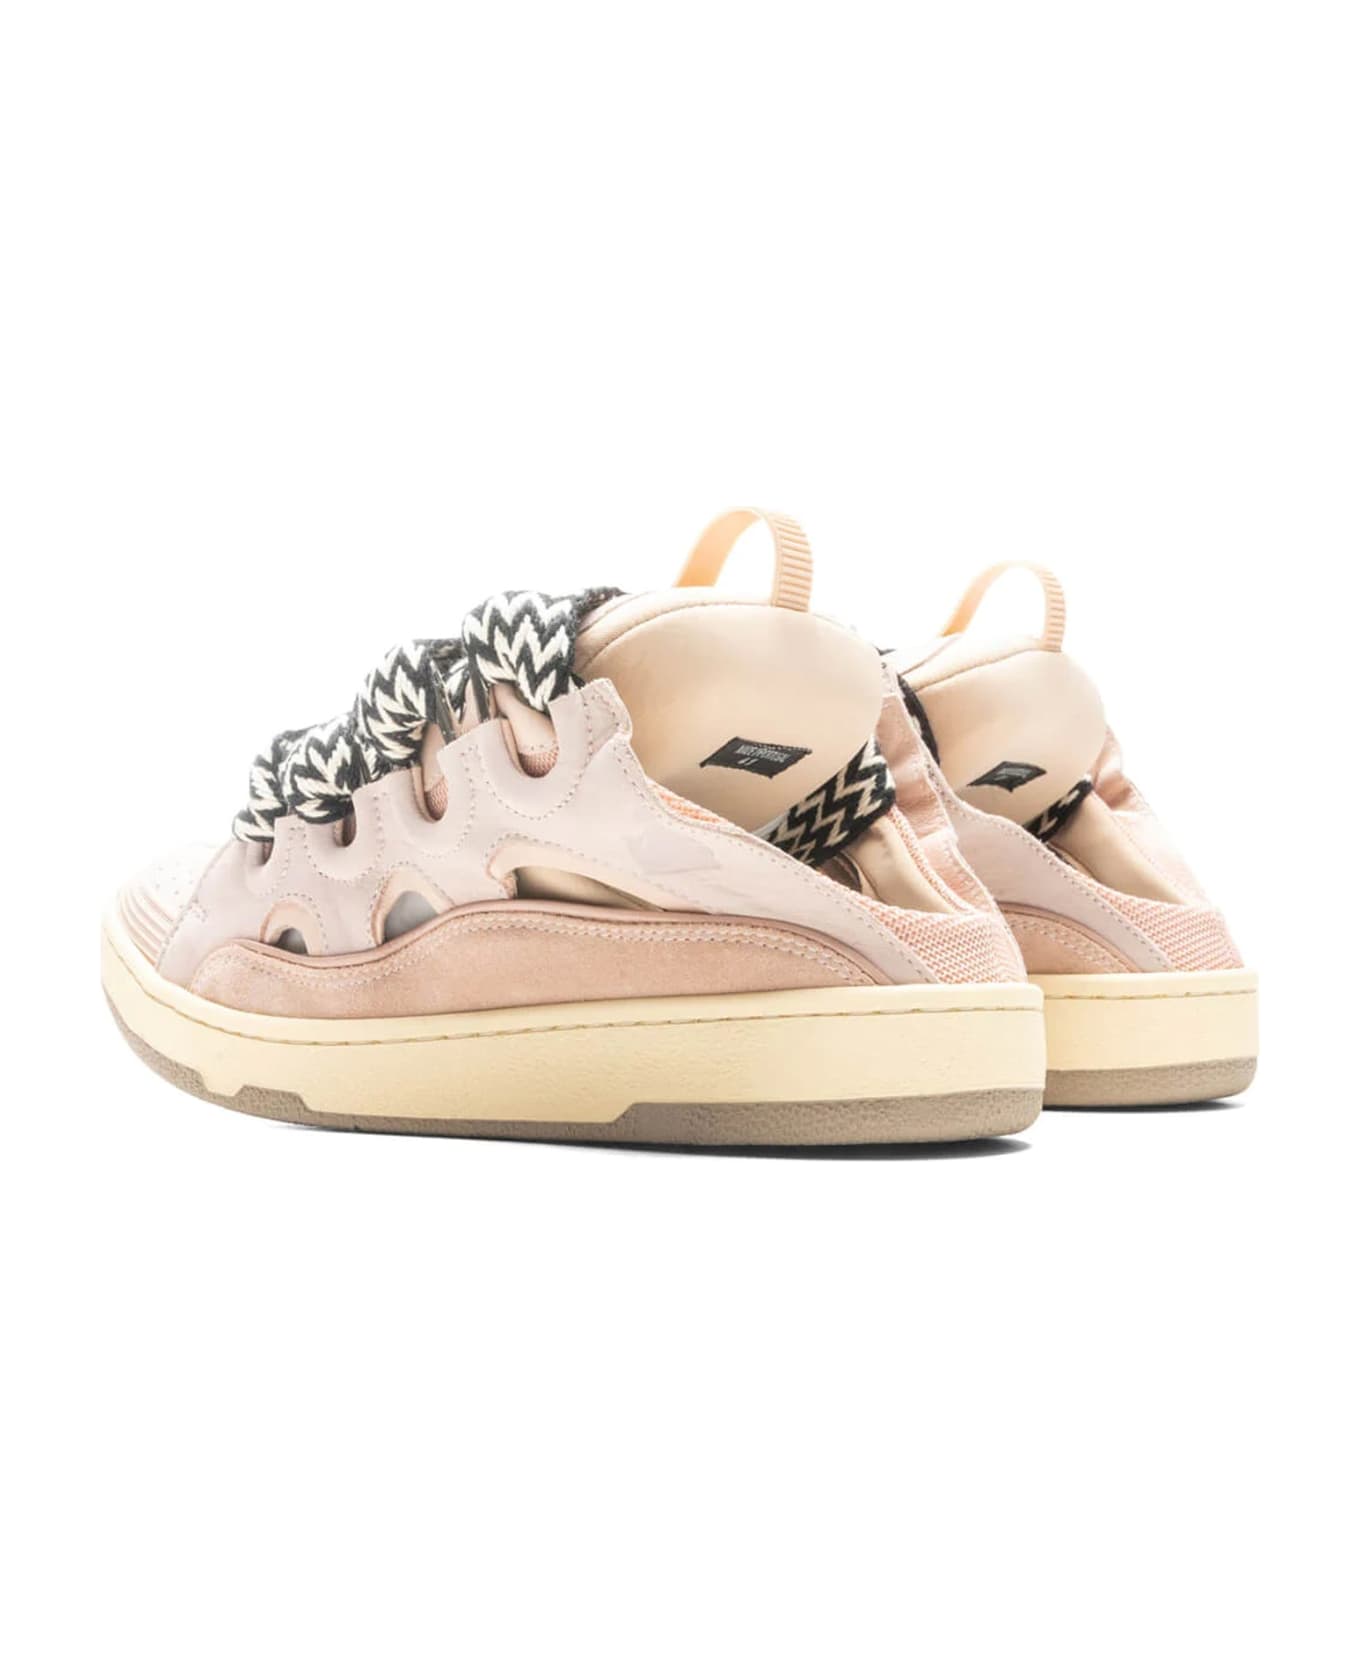 Lanvin Curb Leather Sneakers - Pink スニーカー